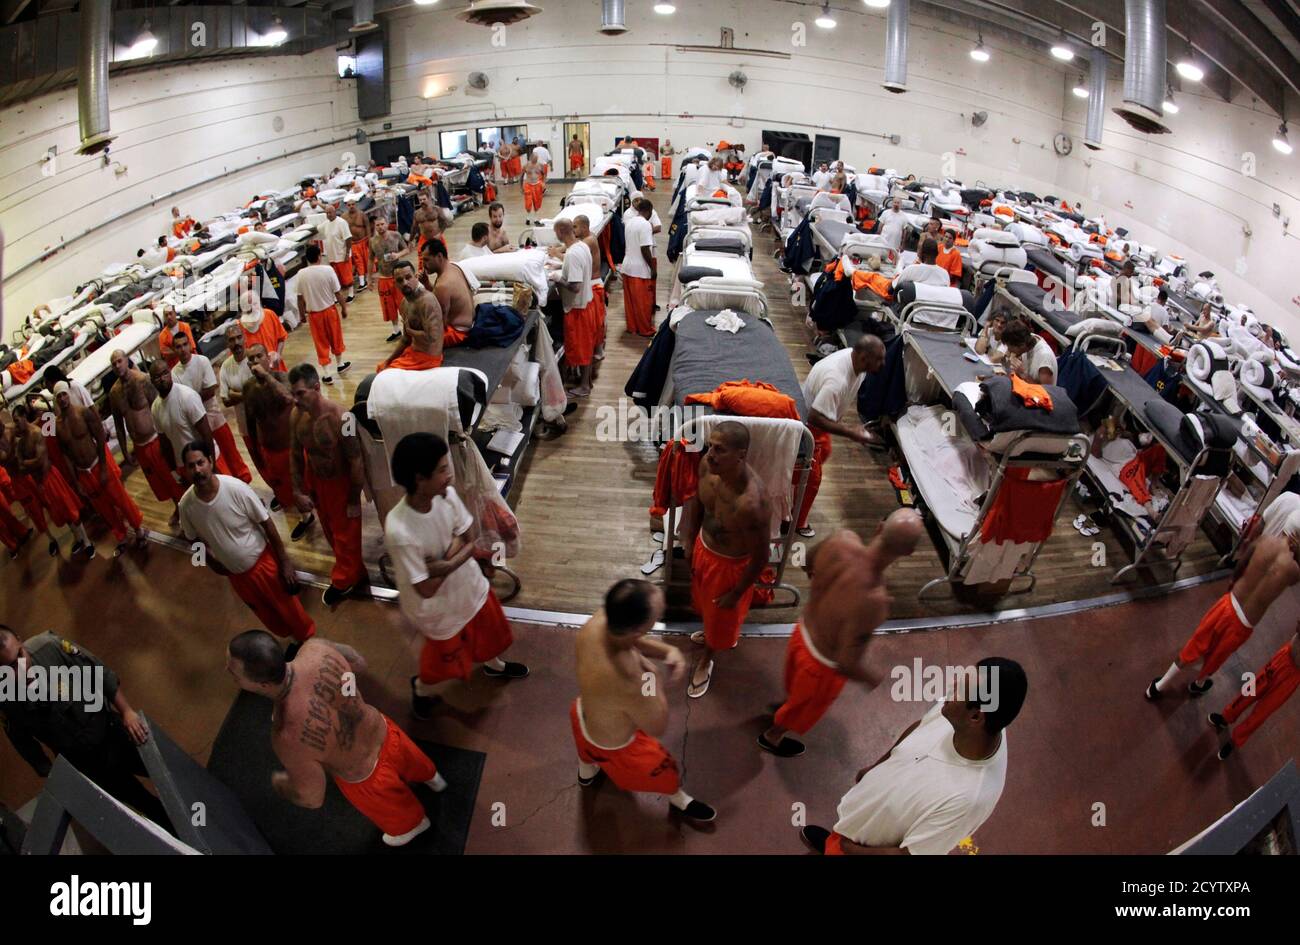 Inmates walk around a gymnasium where they are housed due to overcrowding at the California Institution for Men state prison in Chino, California, June 3, 2011. The Supreme Court has ordered California to release more than 30,000 inmates over the next two years or take other steps to ease overcrowding in its prisons to prevent 'needless suffering and death.' California's 33 adult prisons were designed to hold about 80,000 inmates and now have about 145,000. The U.S. has more than 2 million people in state and local prisons. It has long had the highest incarceration rate in the world. REUTERS/L Stock Photo